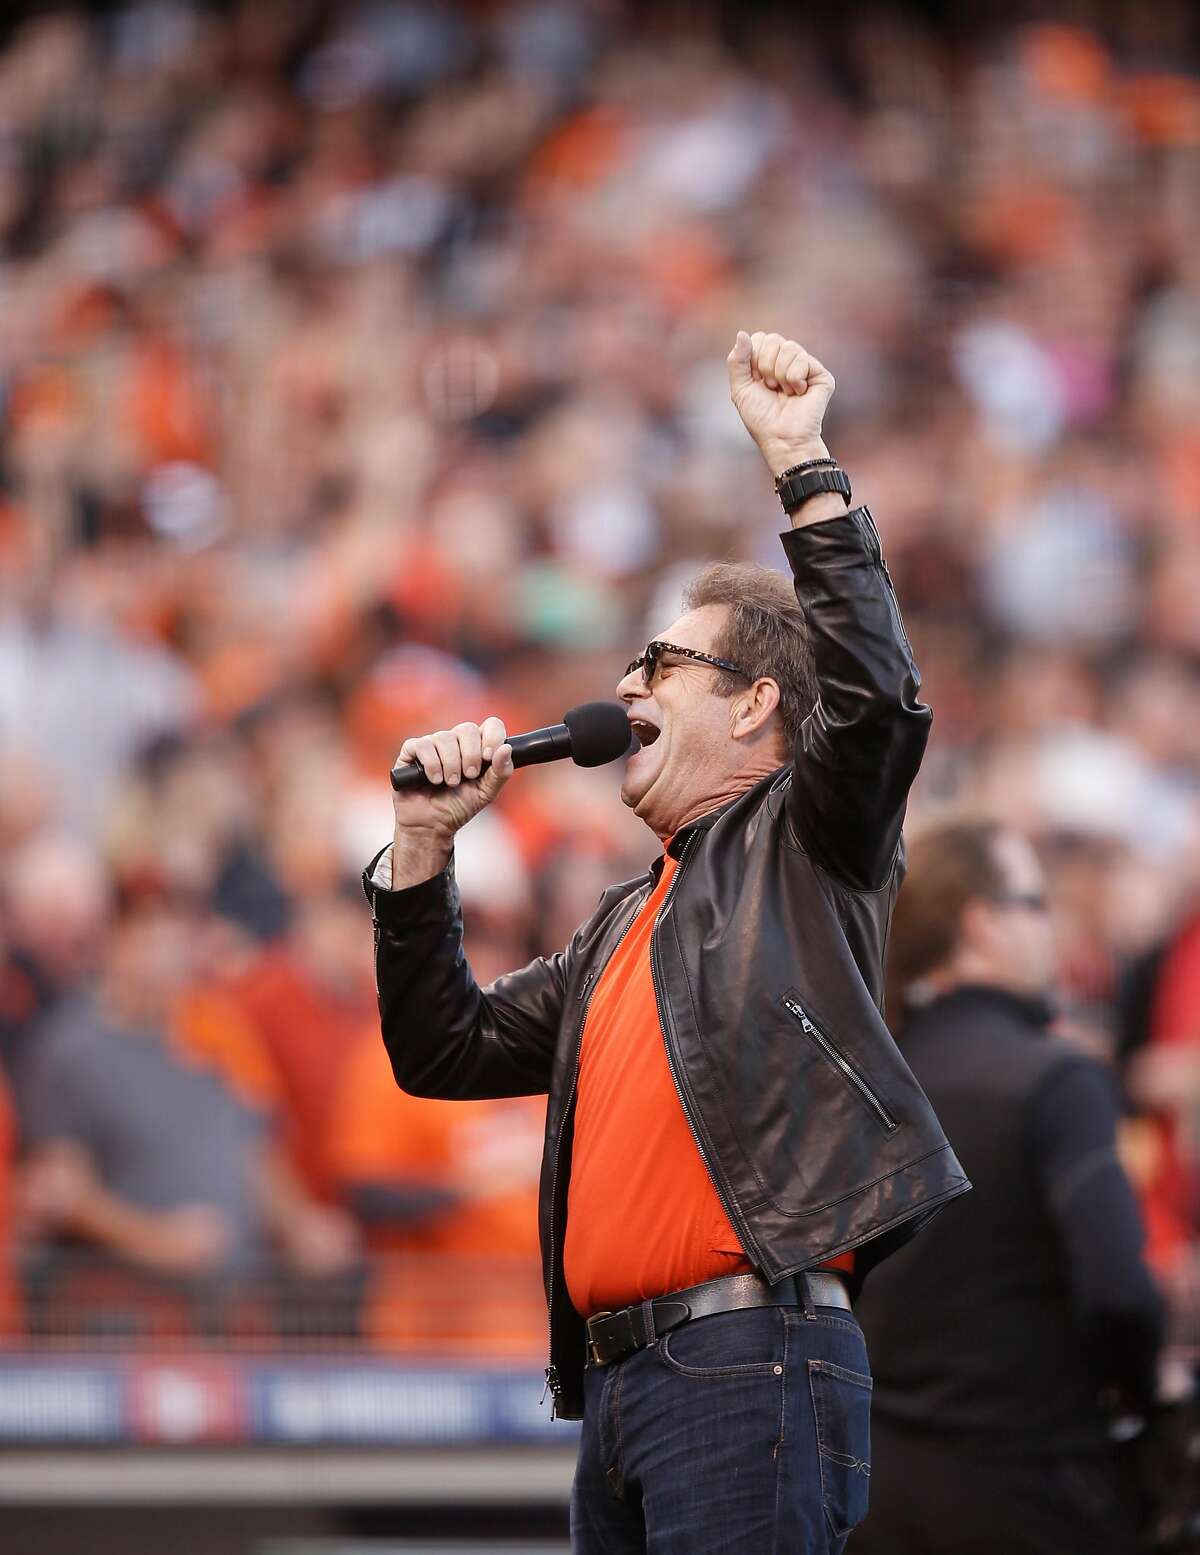 Huey Lewis gets the crowd going before Game 3 of the World Series at AT&T Park on Friday, Oct. 24, 2014 in San Francisco, Calif.